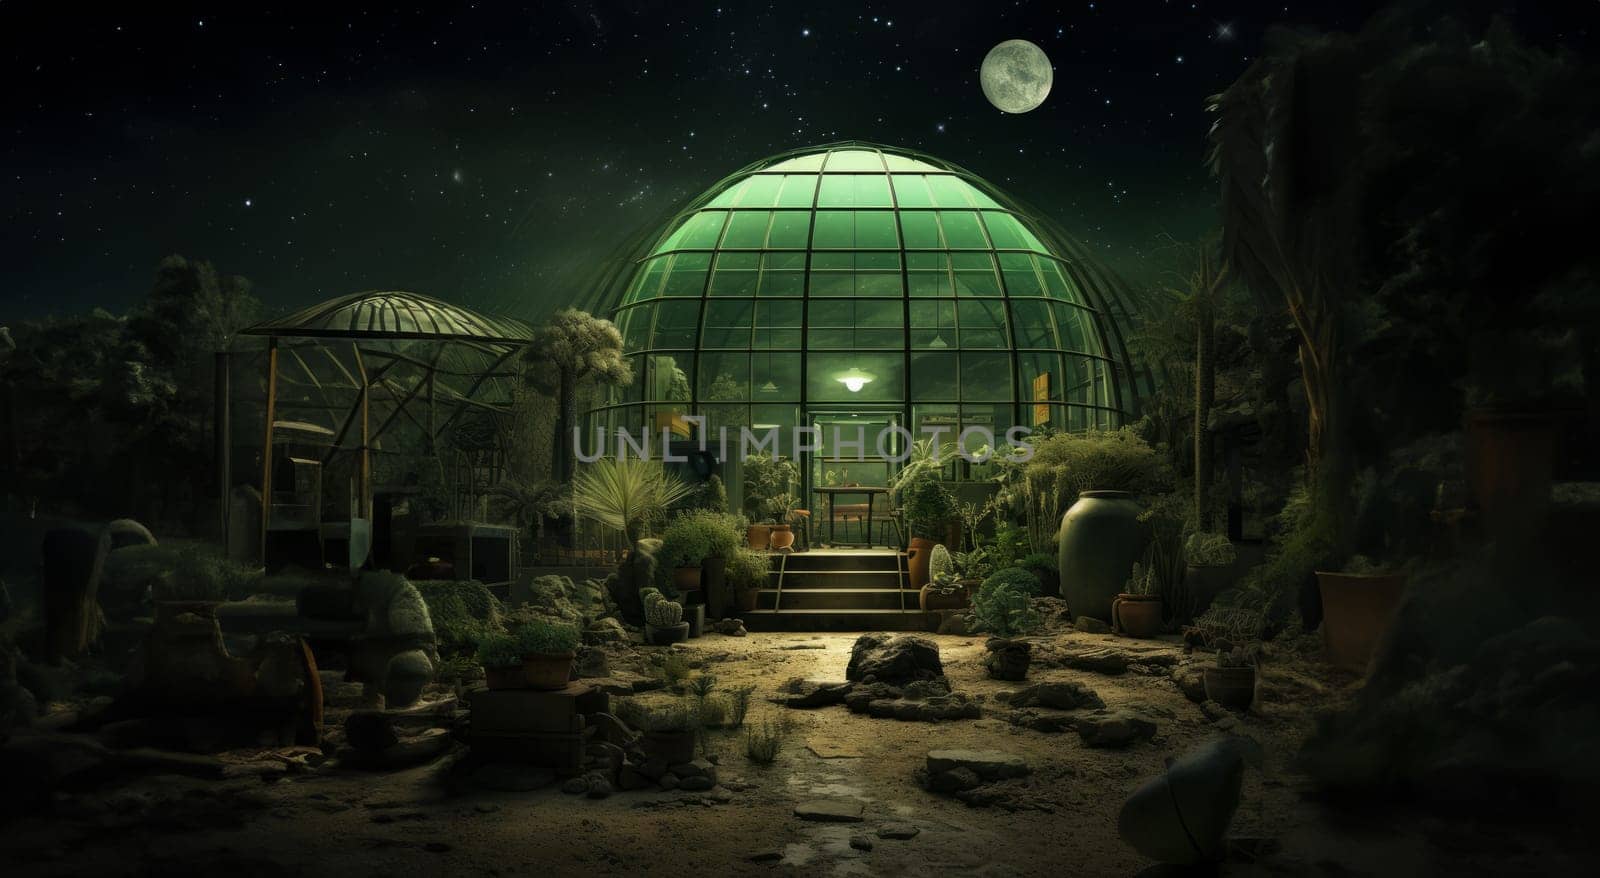 Within a glass-enclosed chamber on Mars, a pioneering space greenhouse cultivates earthly sustenance, showcasing the integration of advanced technology and sustainable practices for extraterrestrial agriculture in the quest for self-sufficiency on the Red Planet.Generated image.